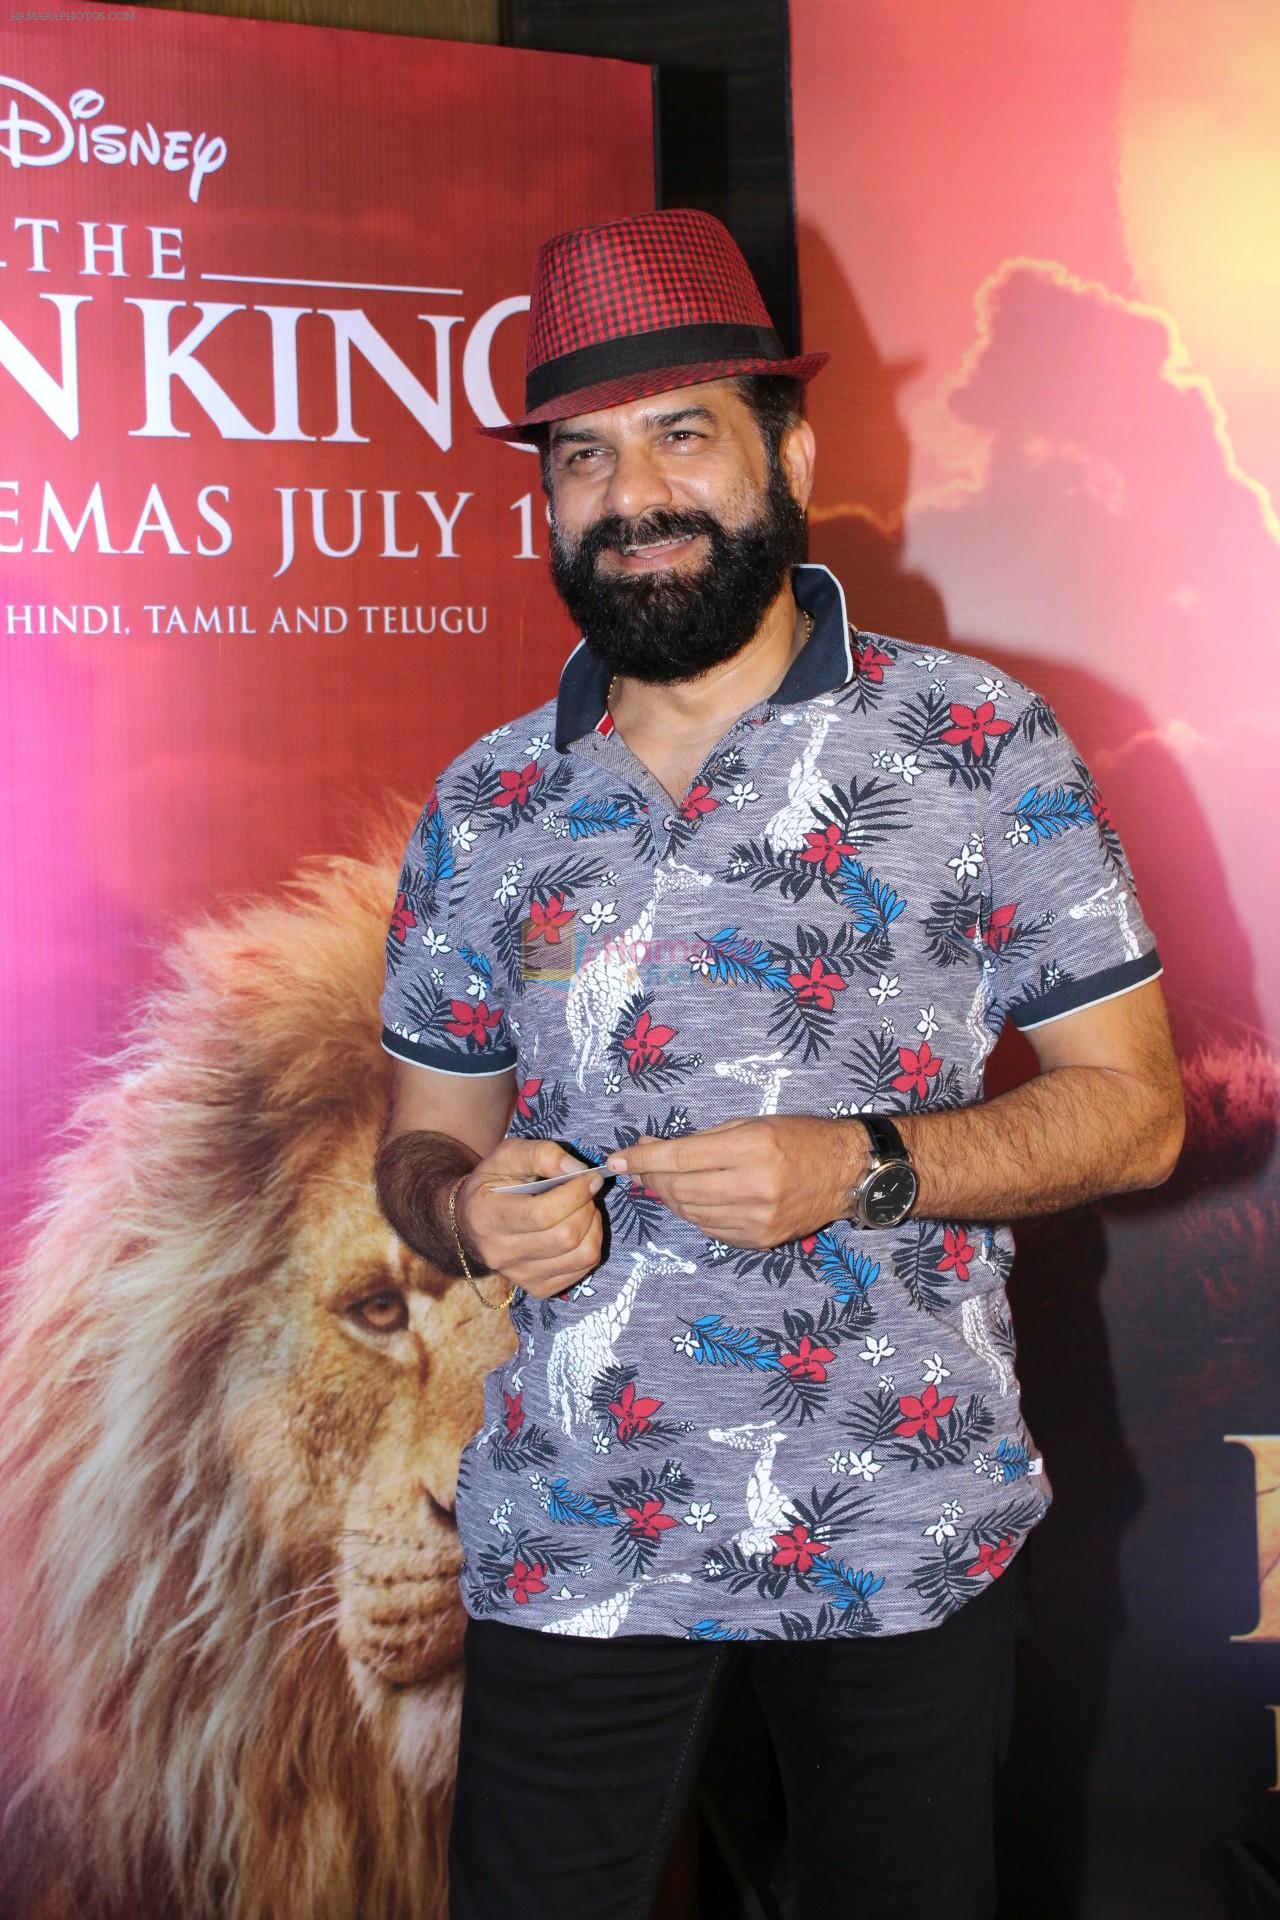 Jamnadas Majethia at the Special screening of film The Lion King on 18th July 2019